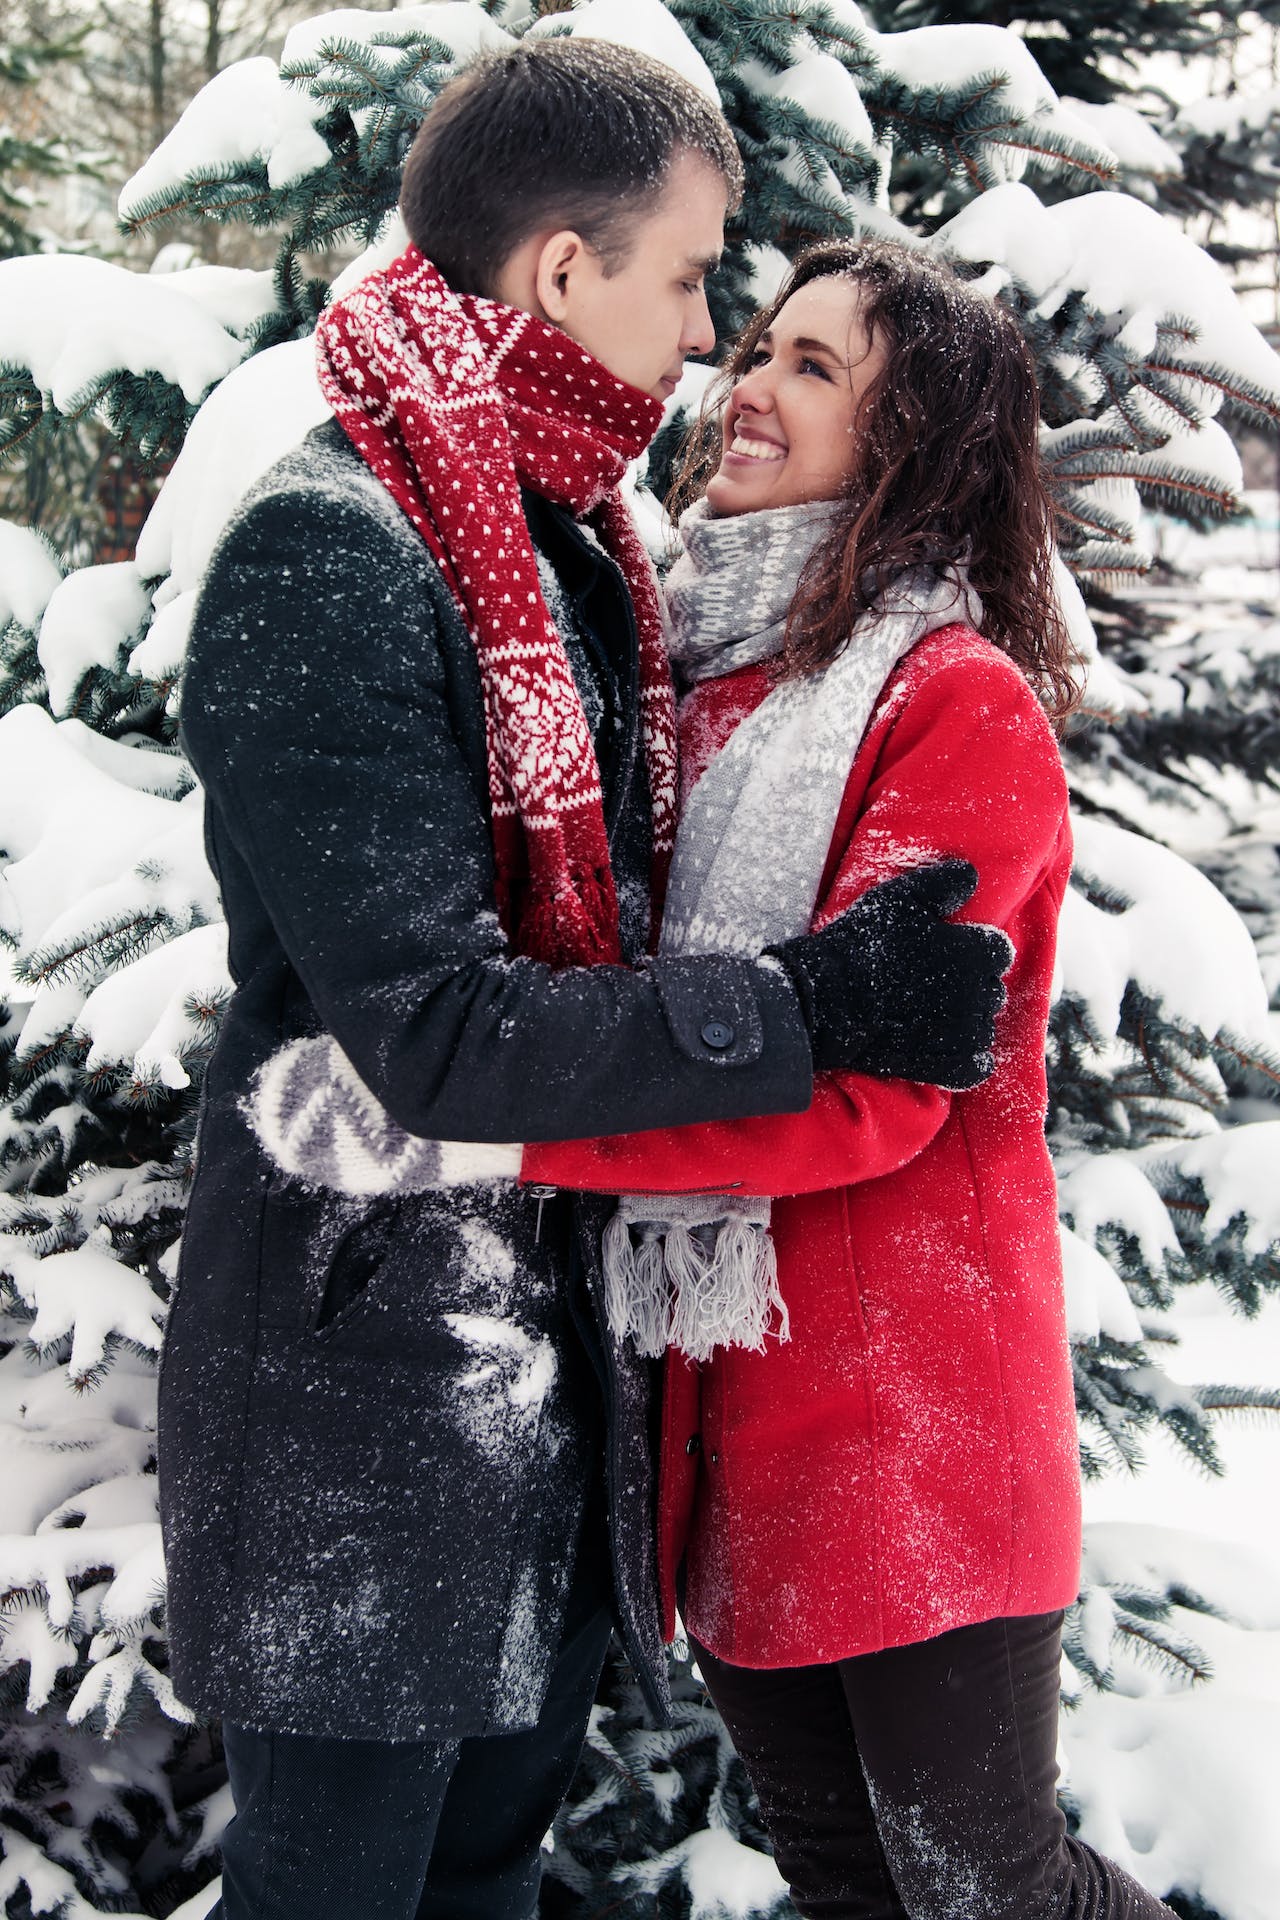 Photo by Pixabay: https://www.pexels.com/photo/full-length-of-happy-friends-in-snow-on-field-247908/